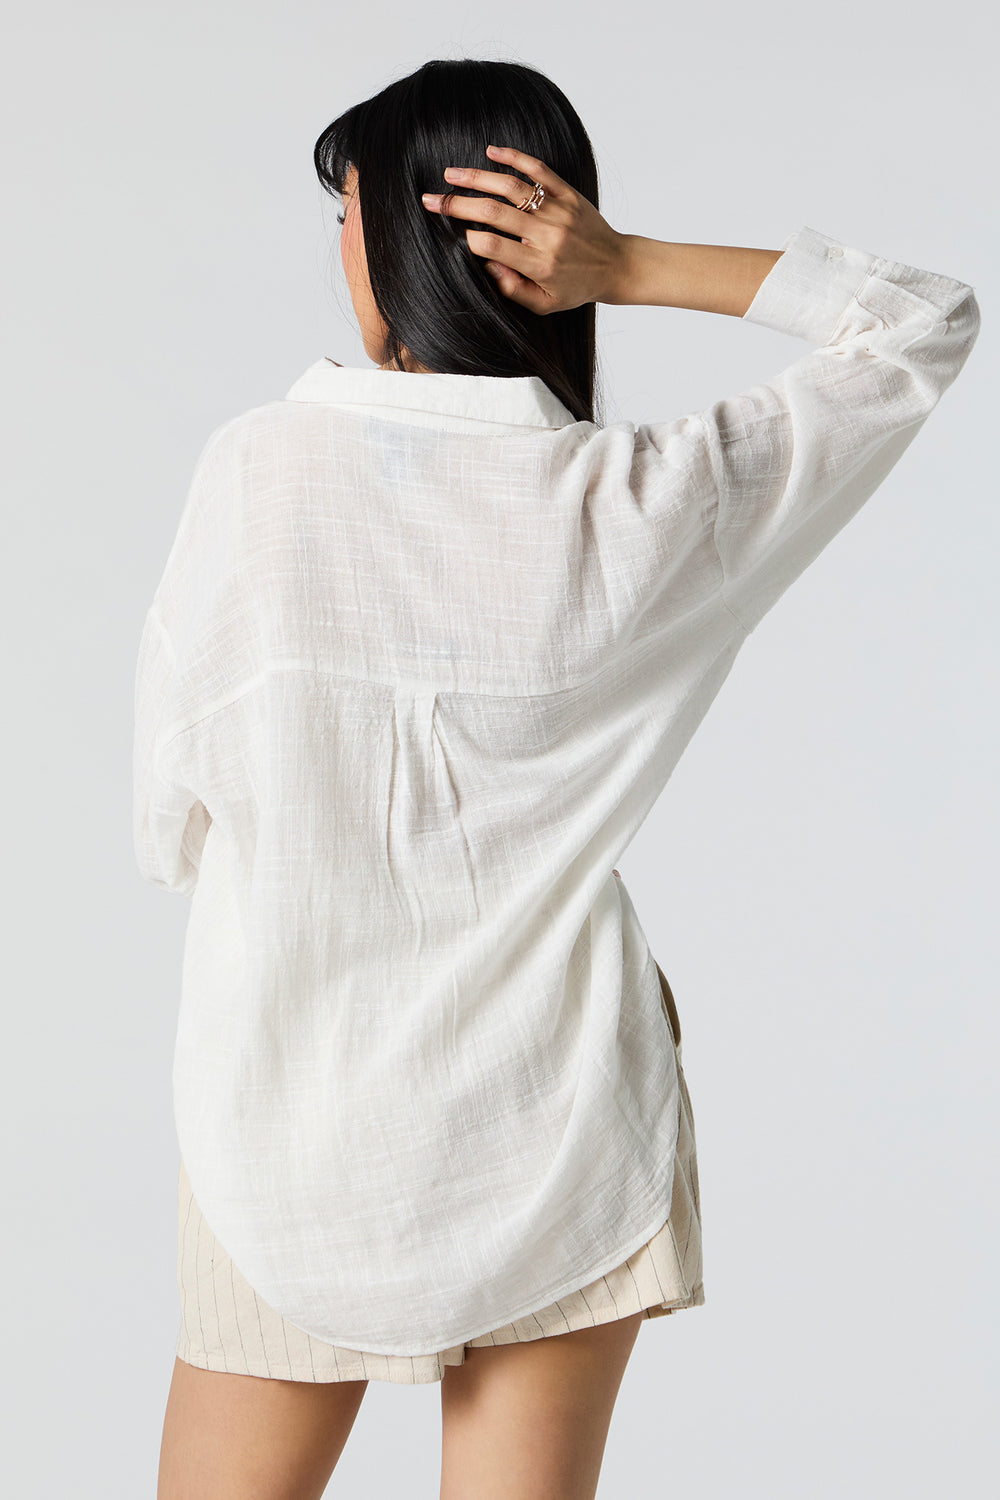 Oversized Textured Button-Up Top Oversized Textured Button-Up Top 6